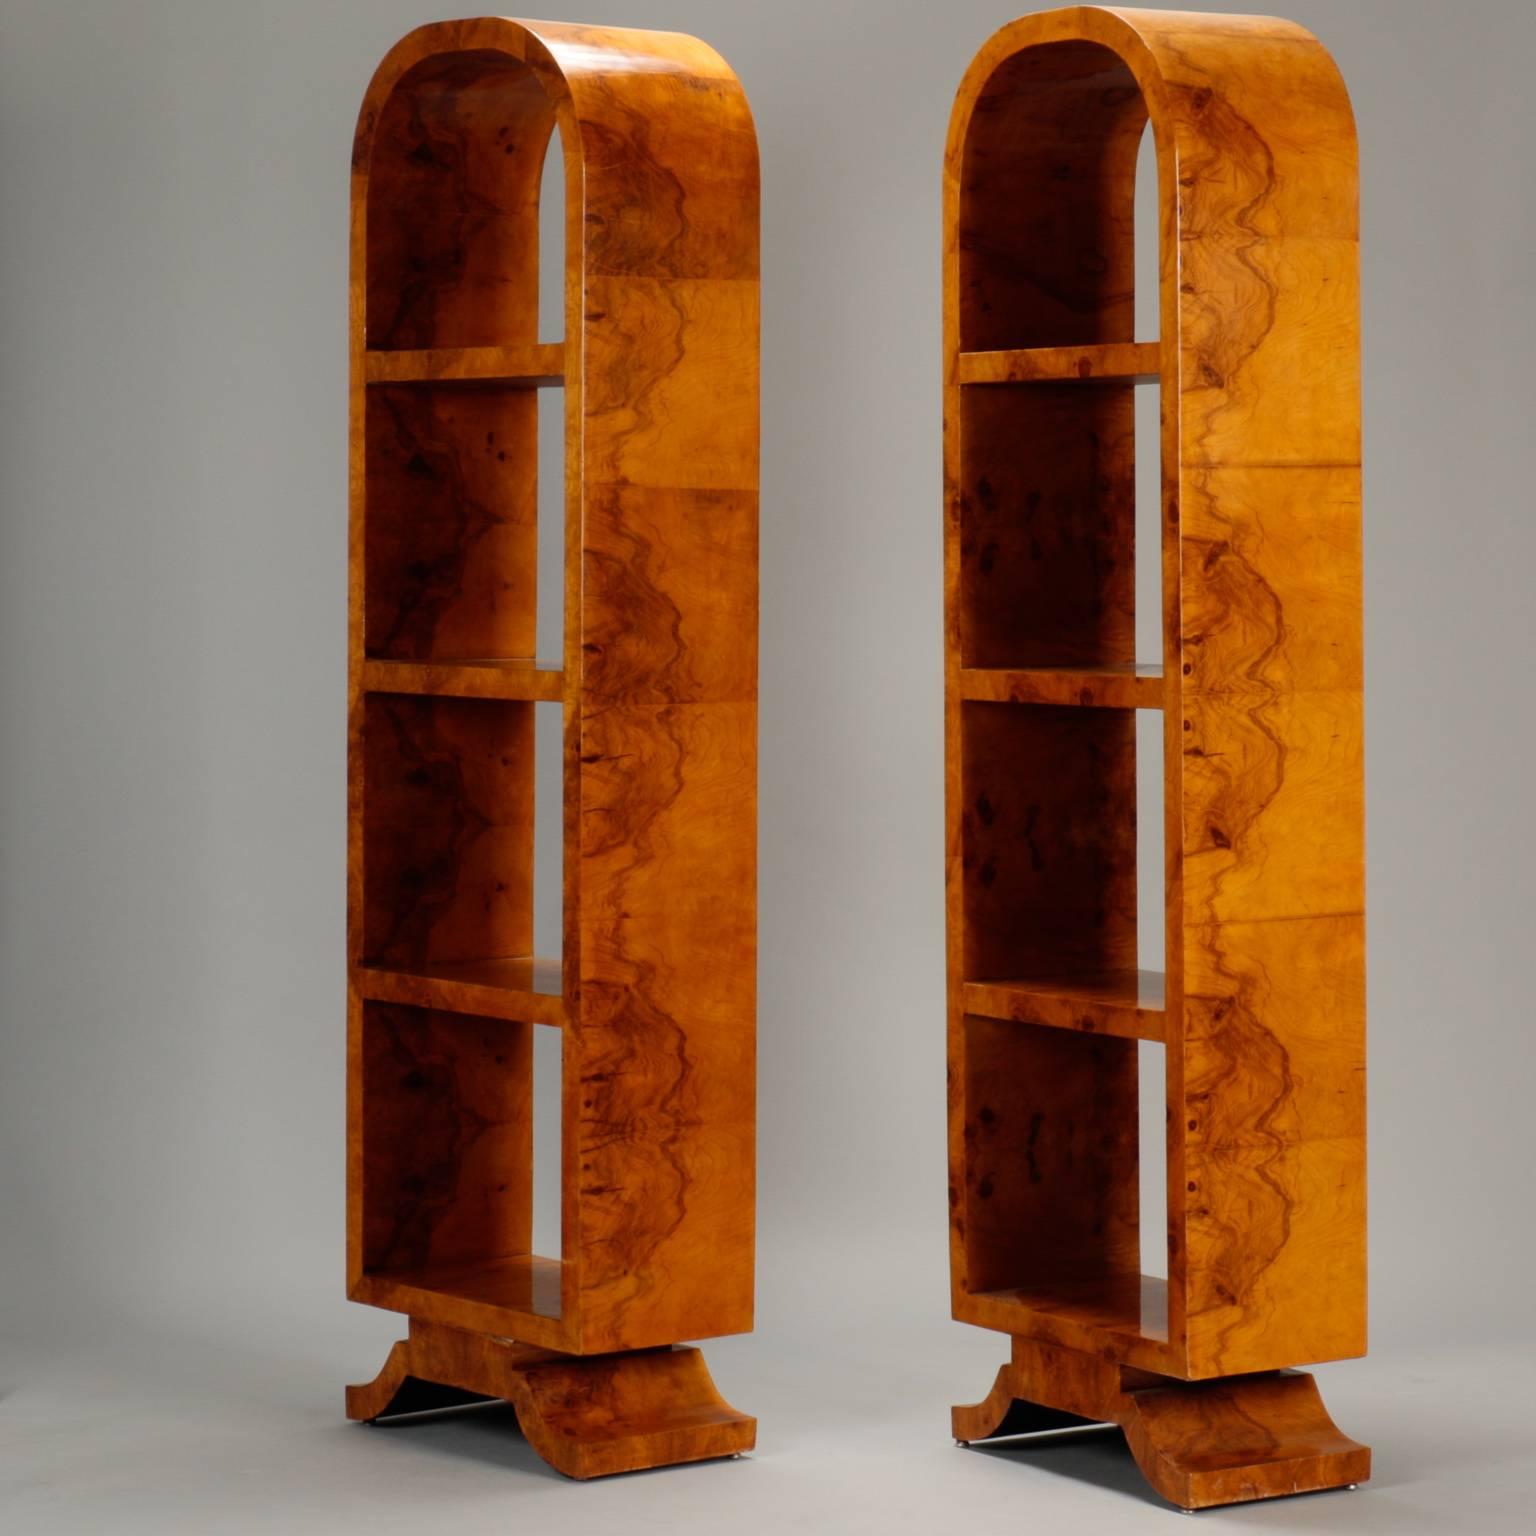 Pair of narrow French etageres in highly polished wood (may be olive wood or some other wood with distinctive burls) with Classic Art Deco style elements. Footed platform base with three fixed shelves and elegant arched tops. Sold and priced as a